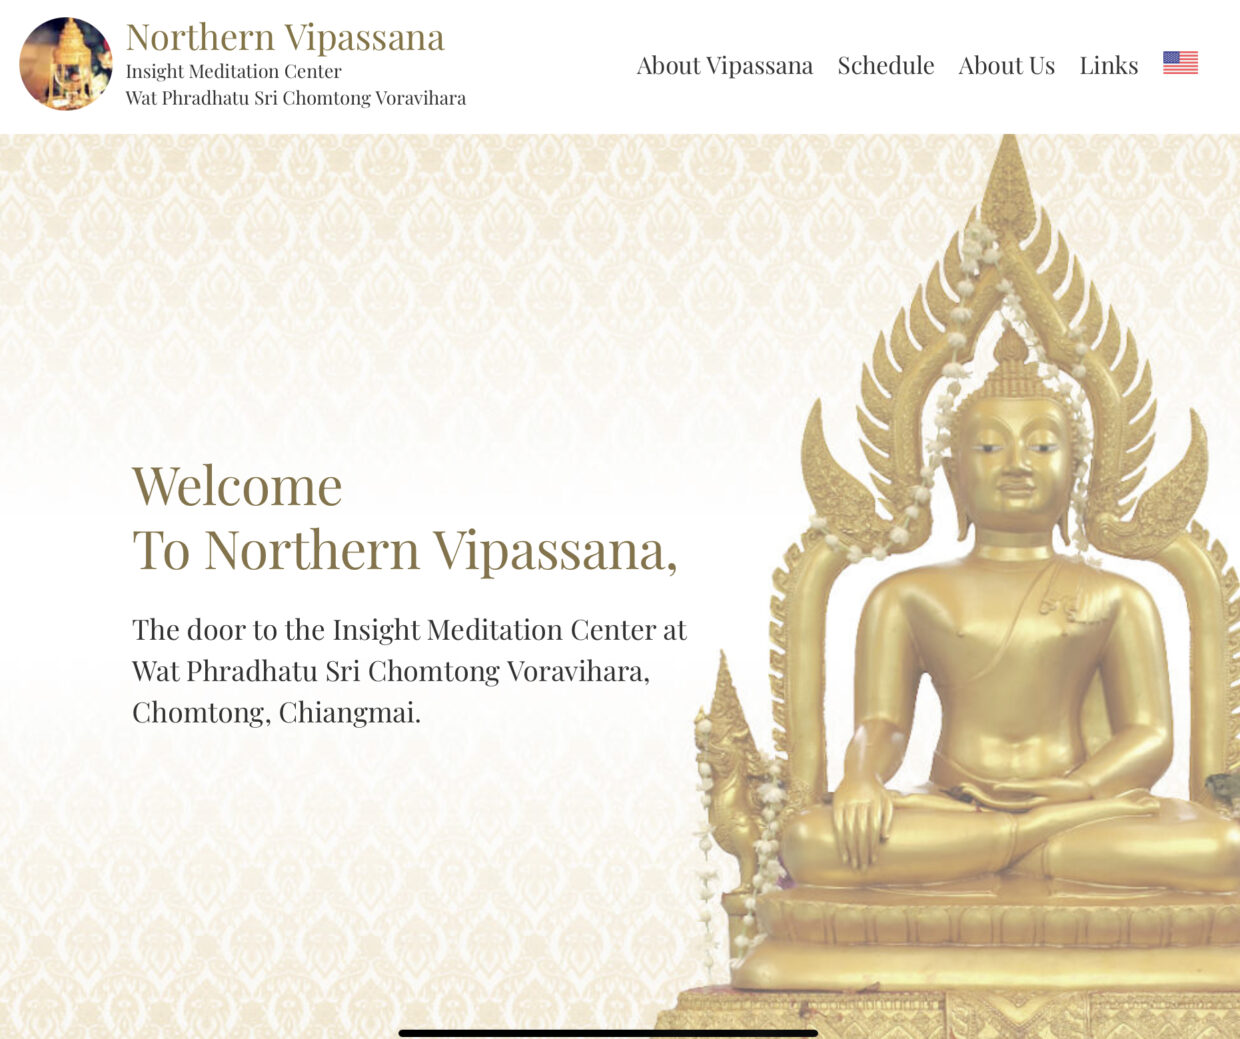 Top page of Northern Vipassana website